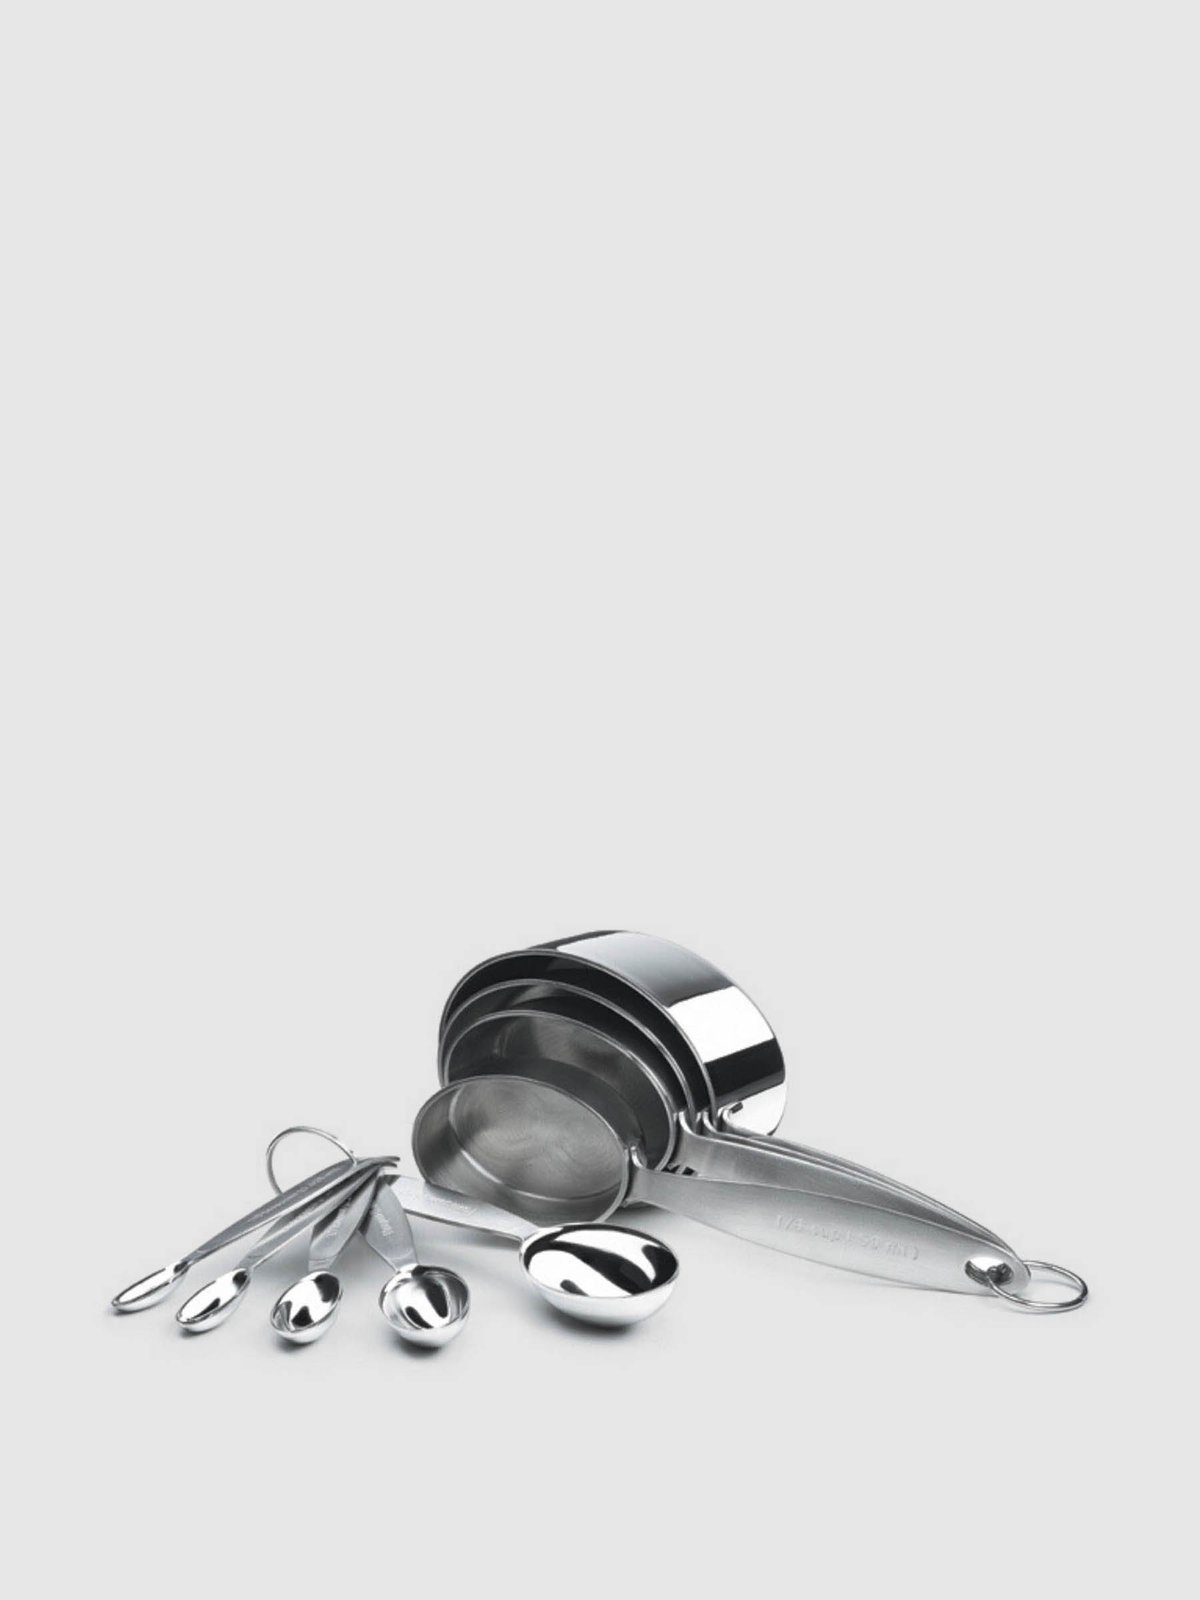 Cuisipro Stainless Steel Measuring Cup and Spoon Set